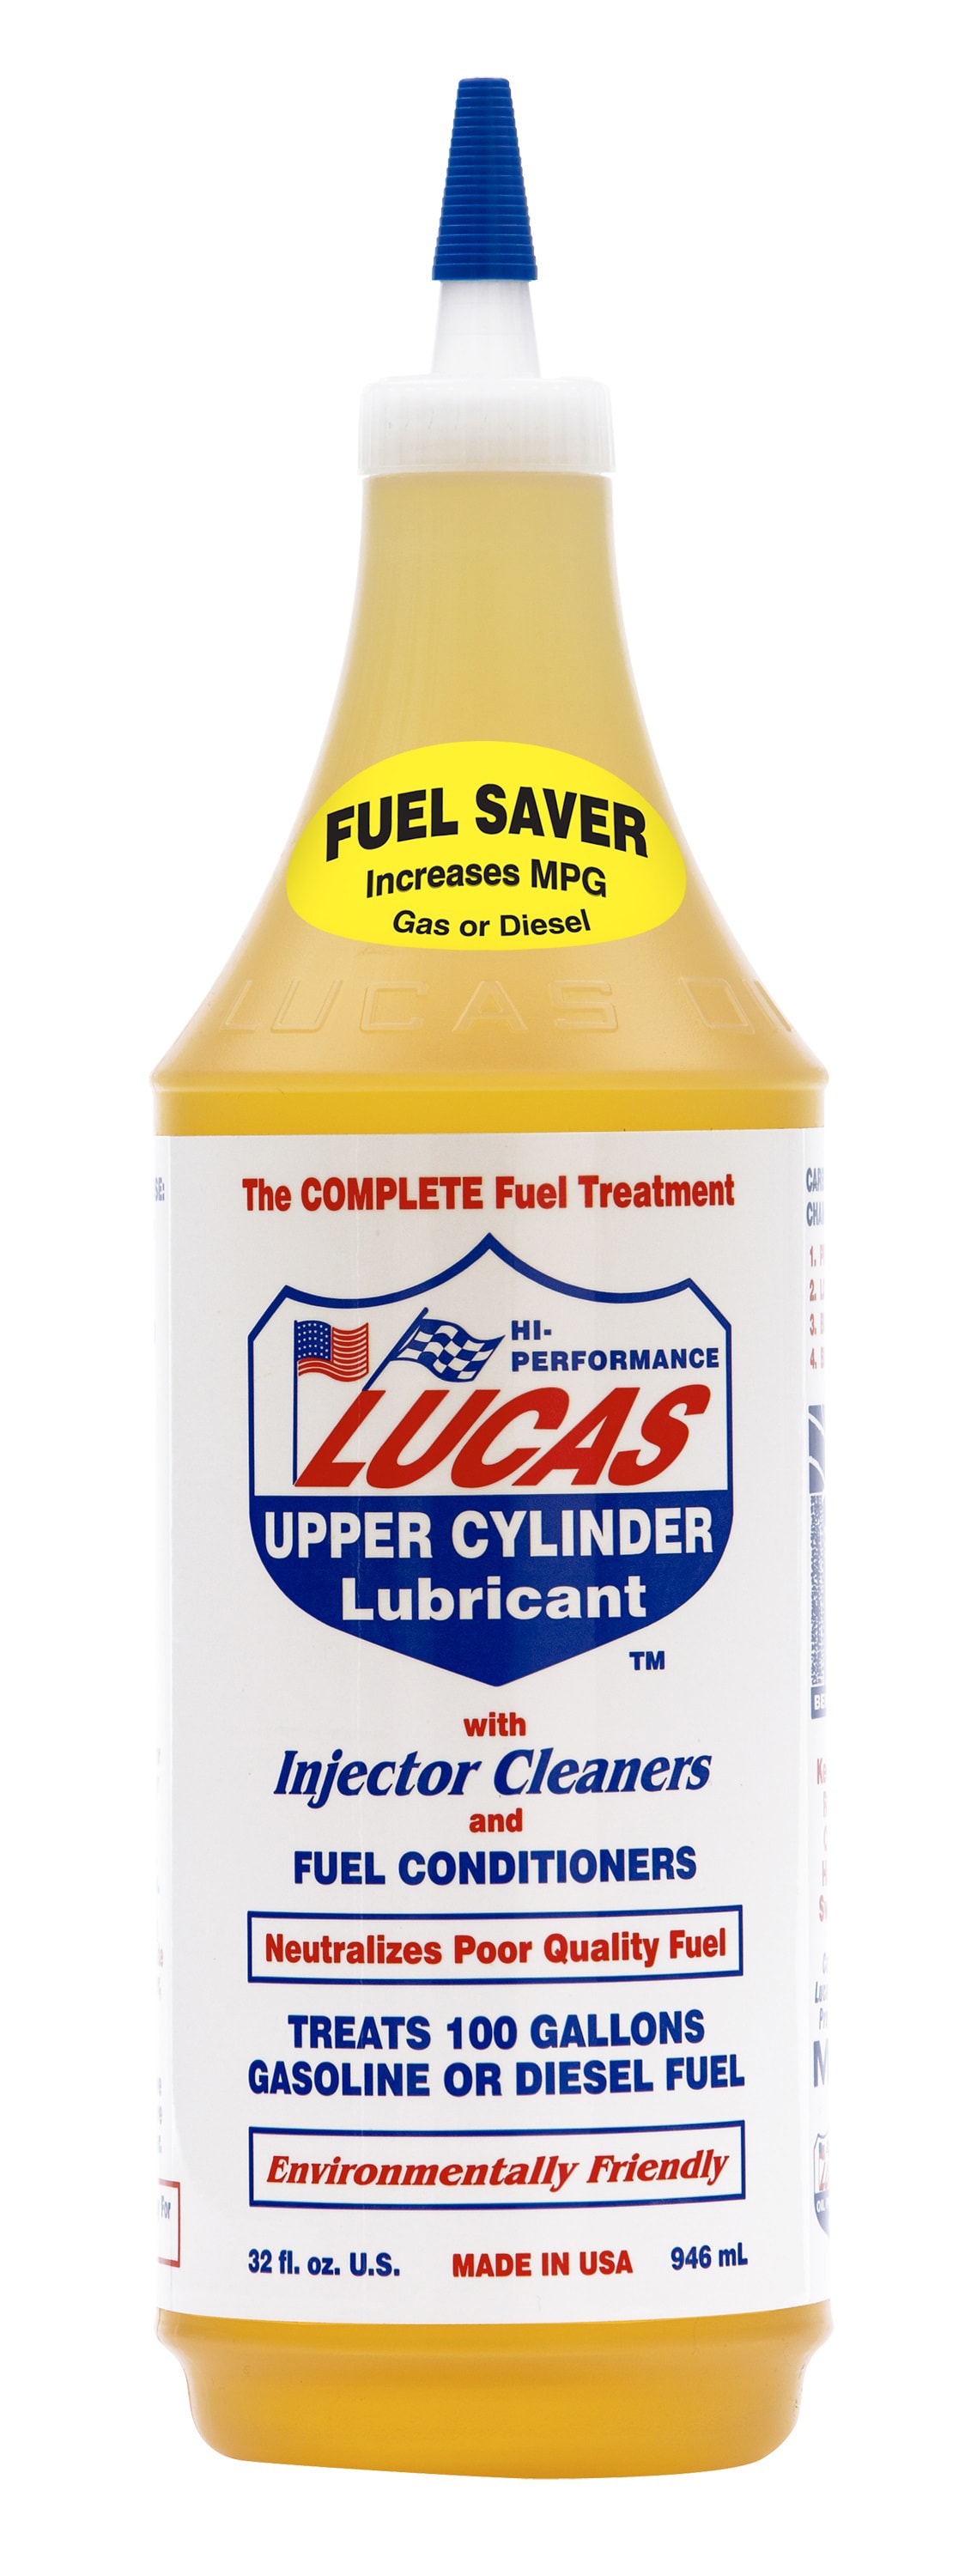 Miracle Brands MiracleWipes for Auto - 90 Ct Streak-Free Car